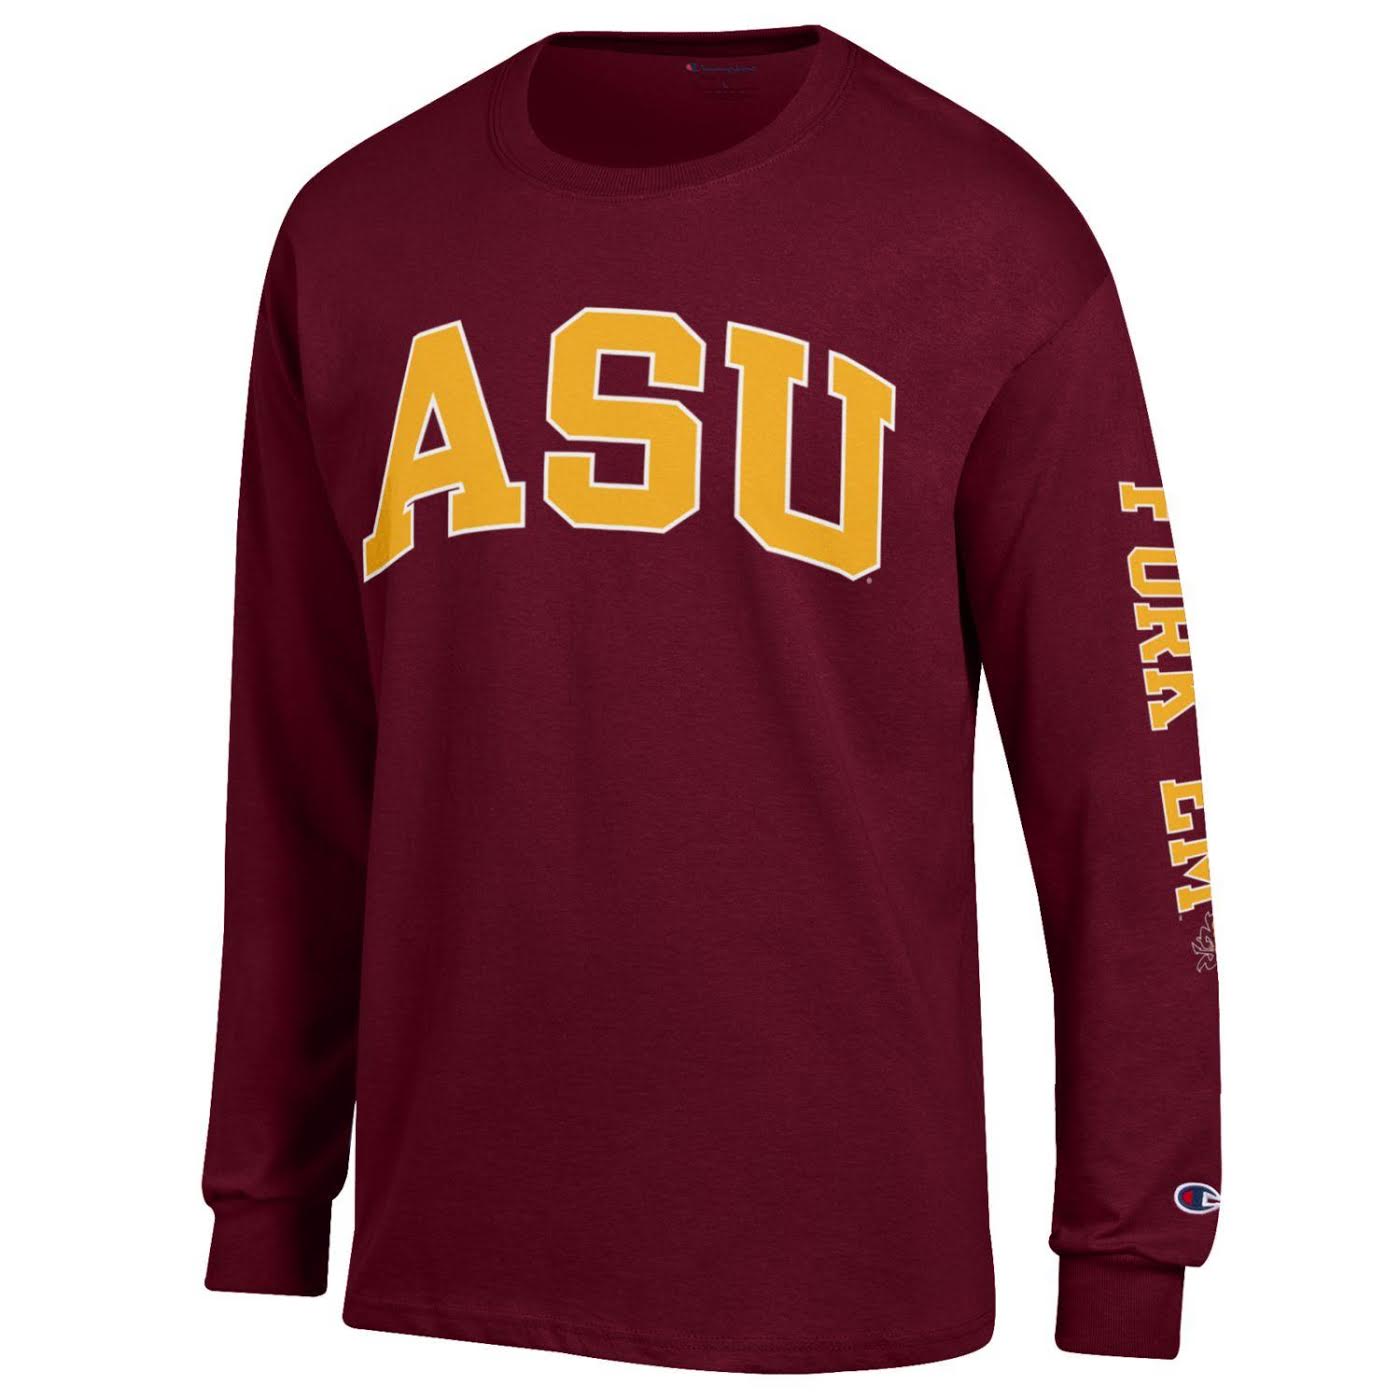 ASU maroon long sleeve with 'ASU' on front and 'Fork Em' next to Sparky on the left arm